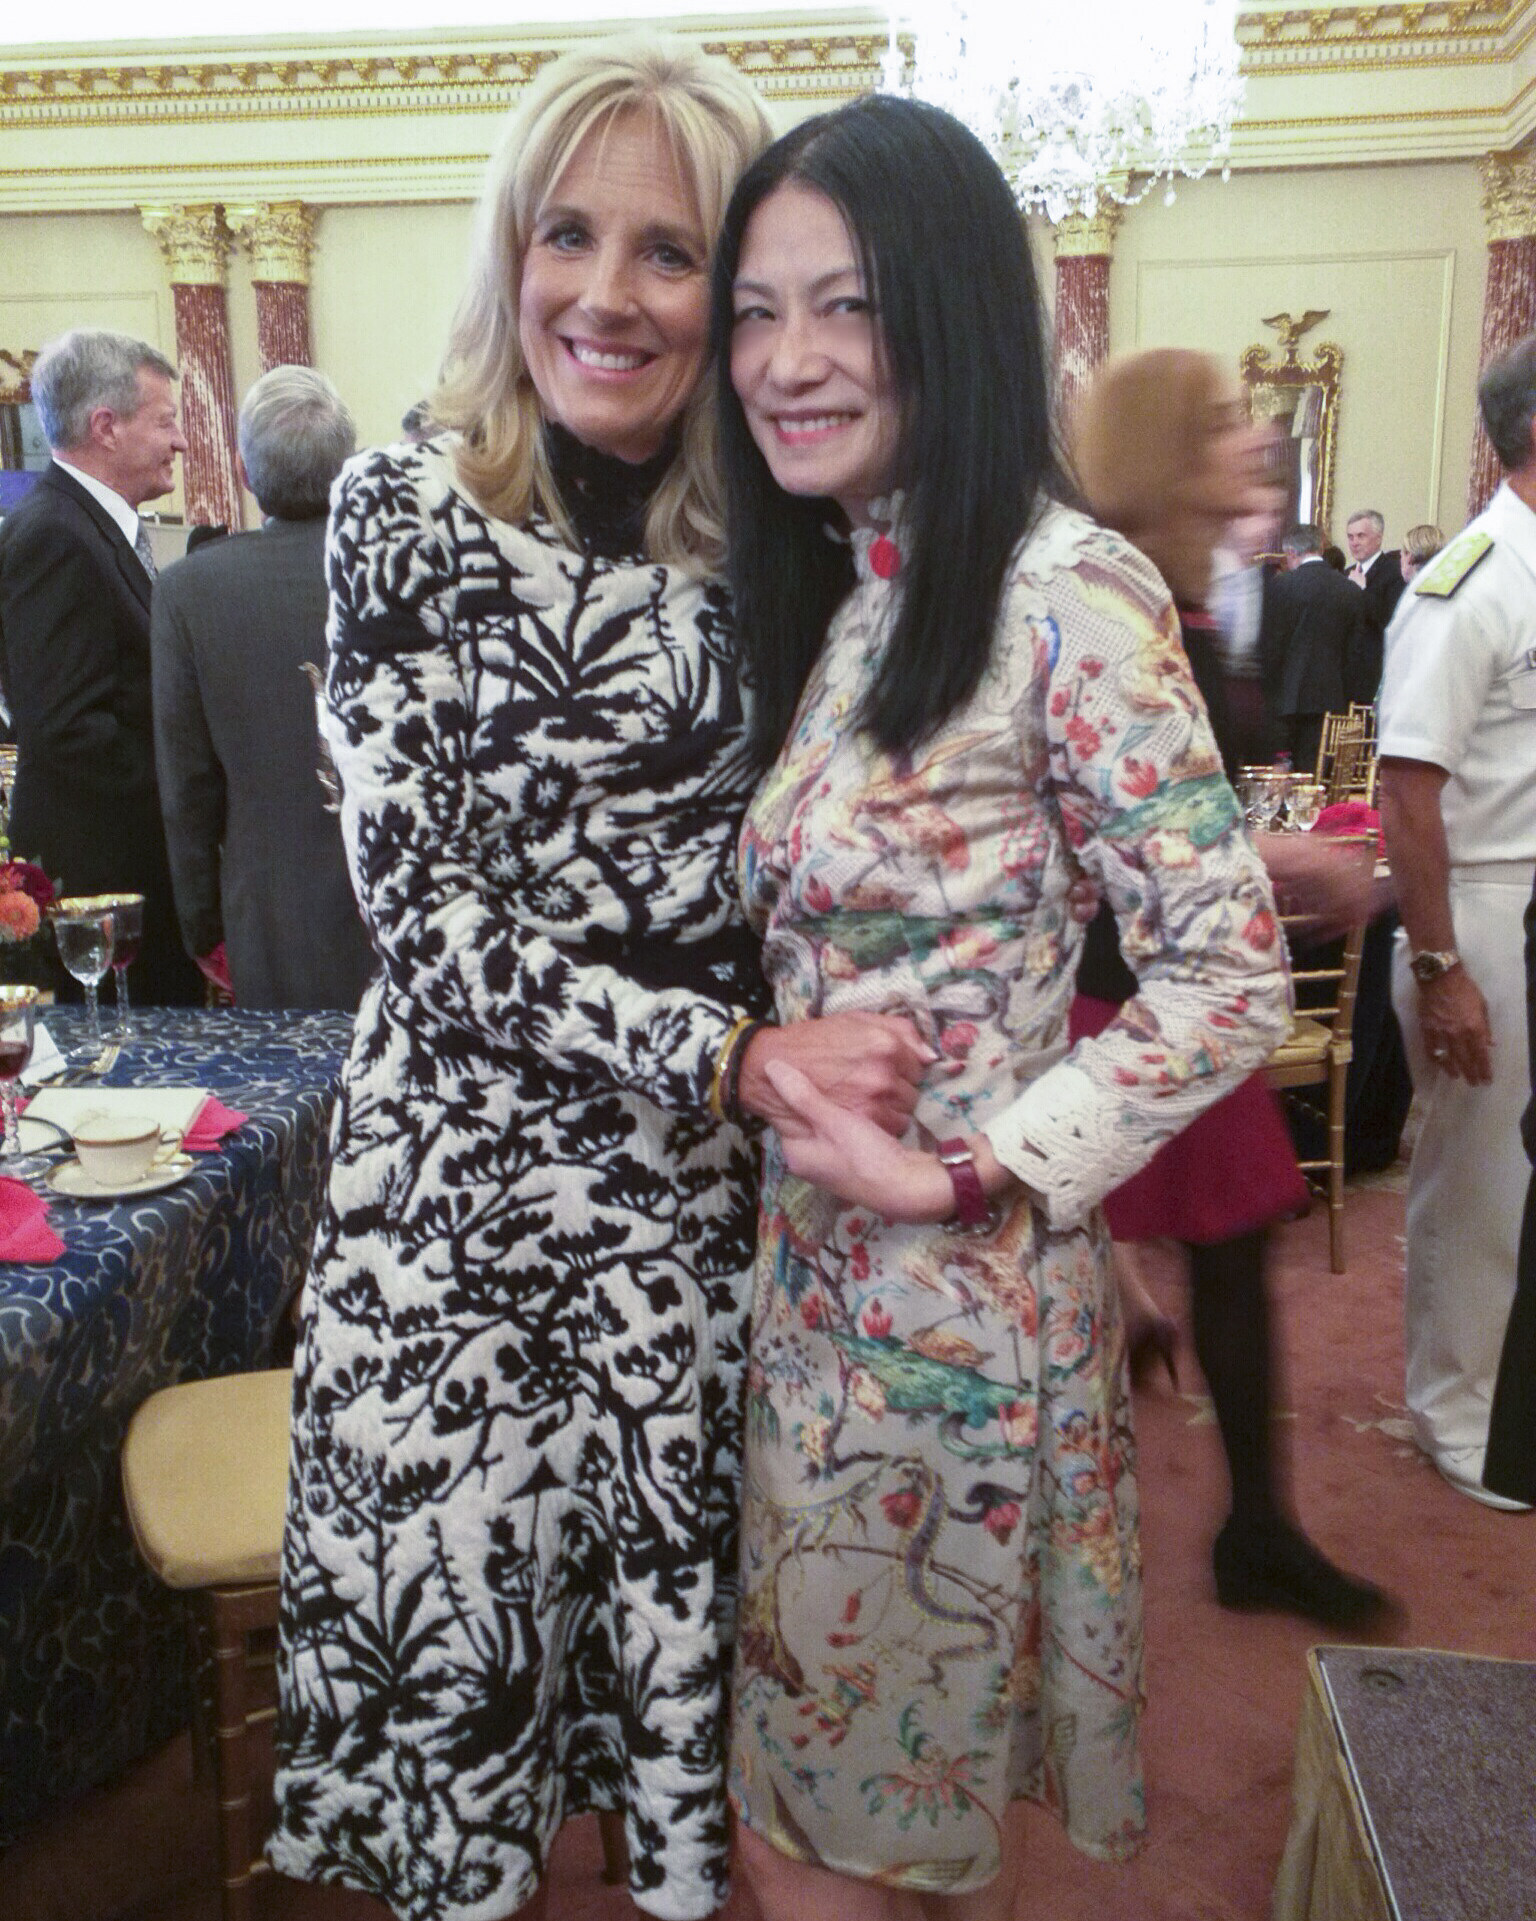 Vivienne Tam and Jill Biden at a luncheon honouring Chinese President Xi Jinping at the US State Department in 2015.